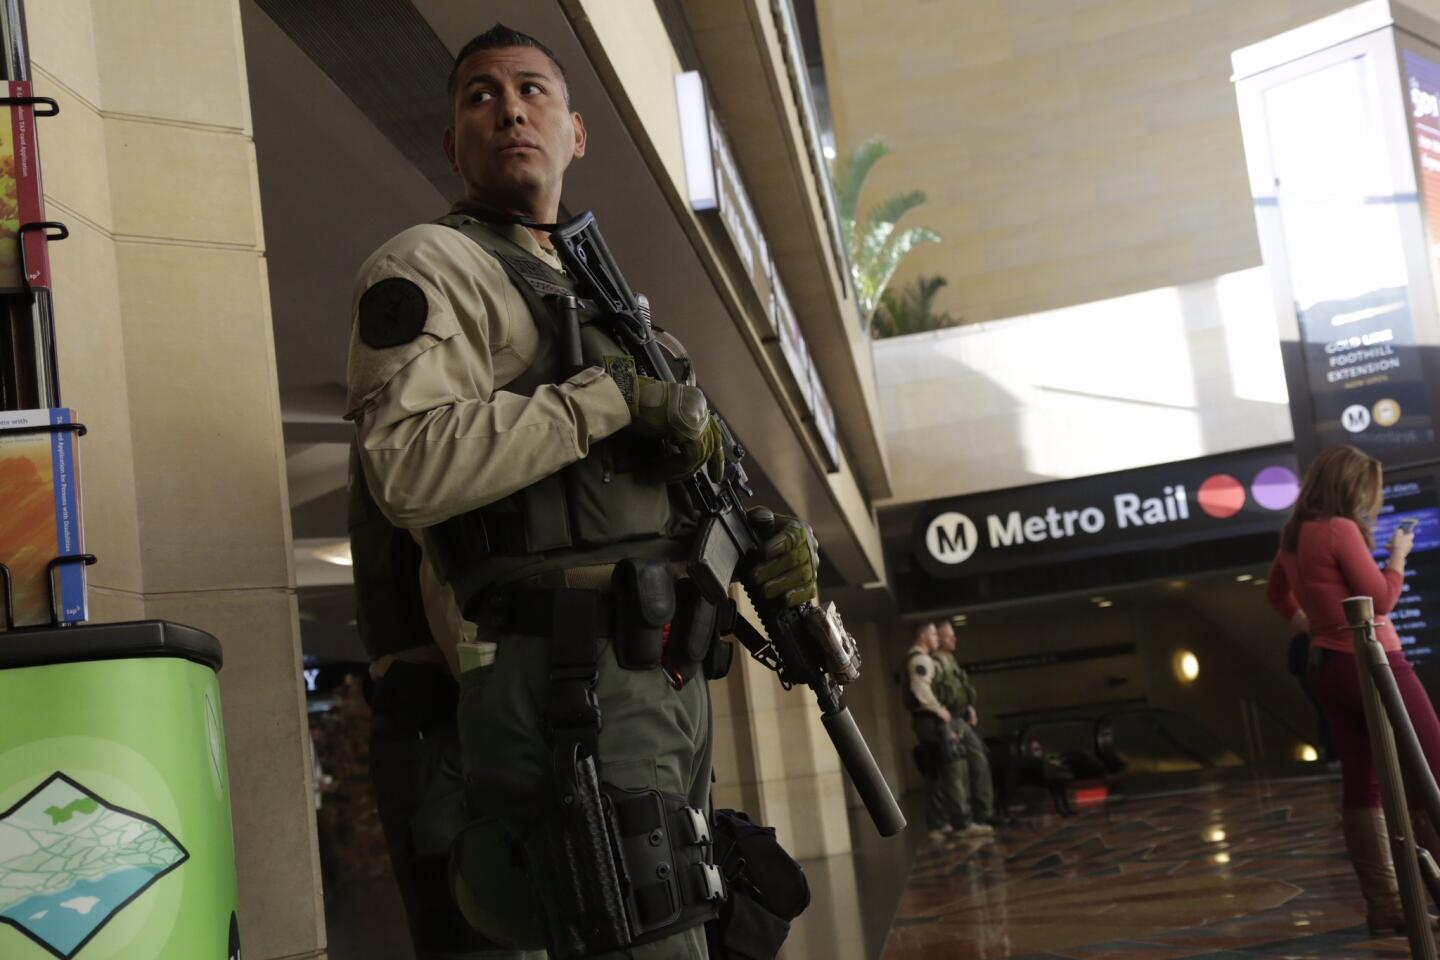 LAX and Union Station on heightened alert